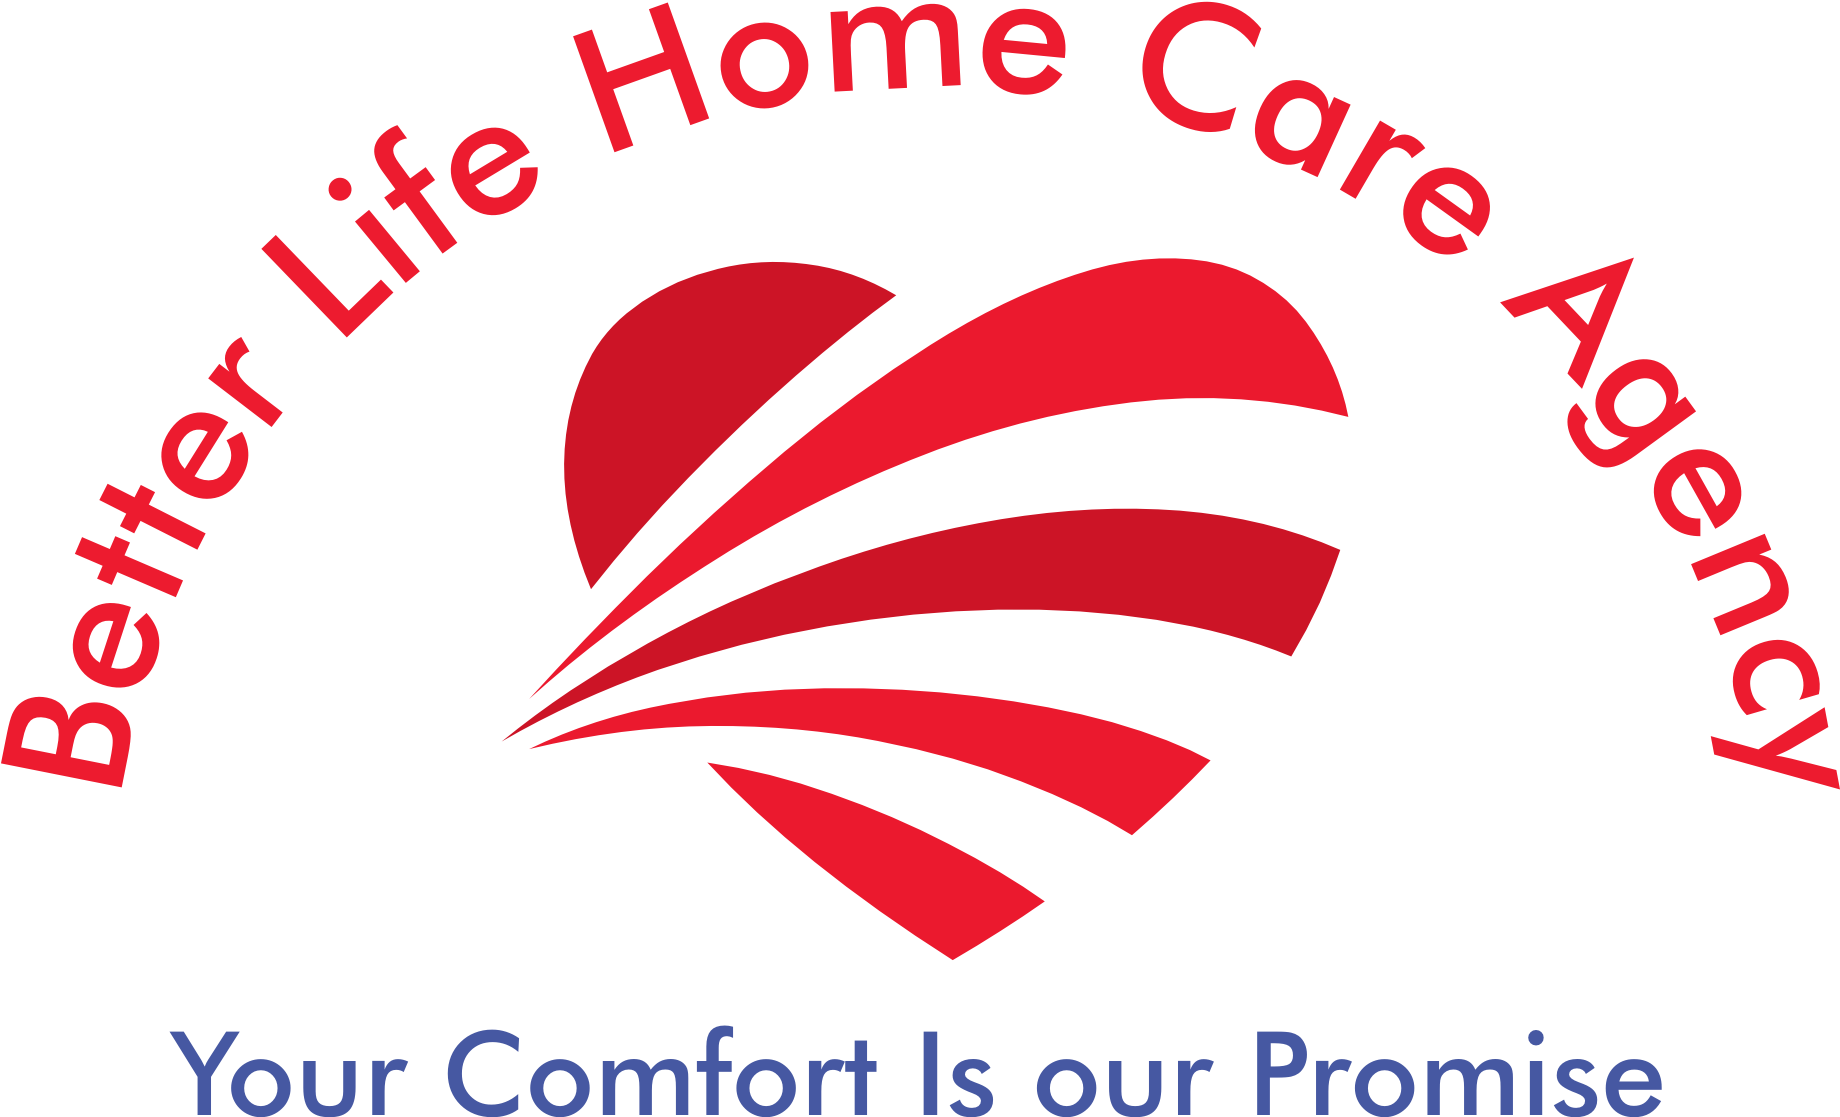 Better Life Home Care Agency Llc - Graphic Design (1839x1131)